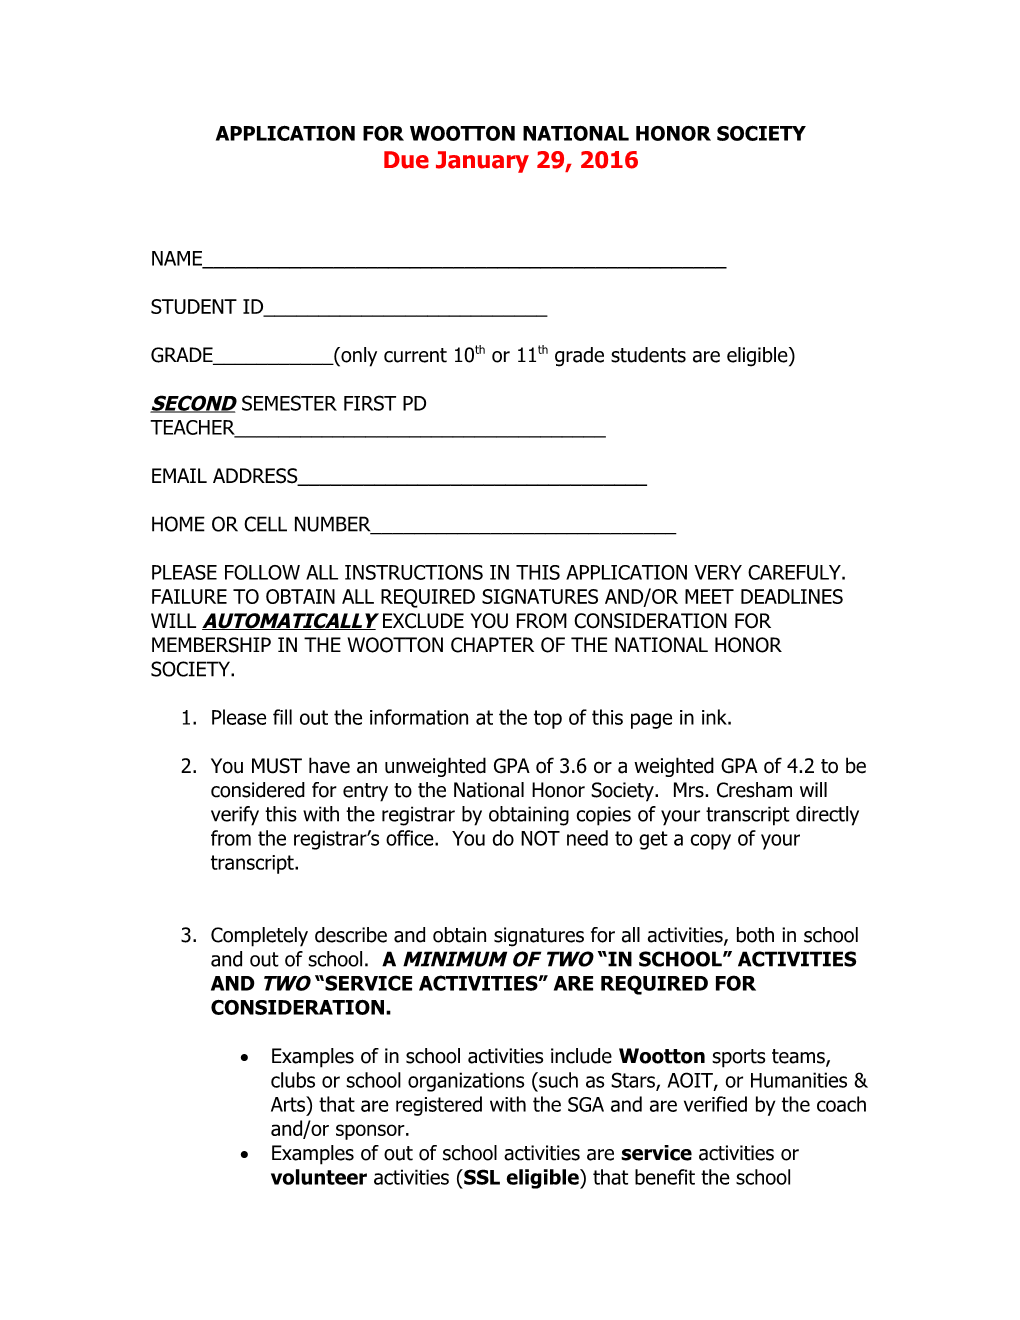 Application for Wootton National Honors Society